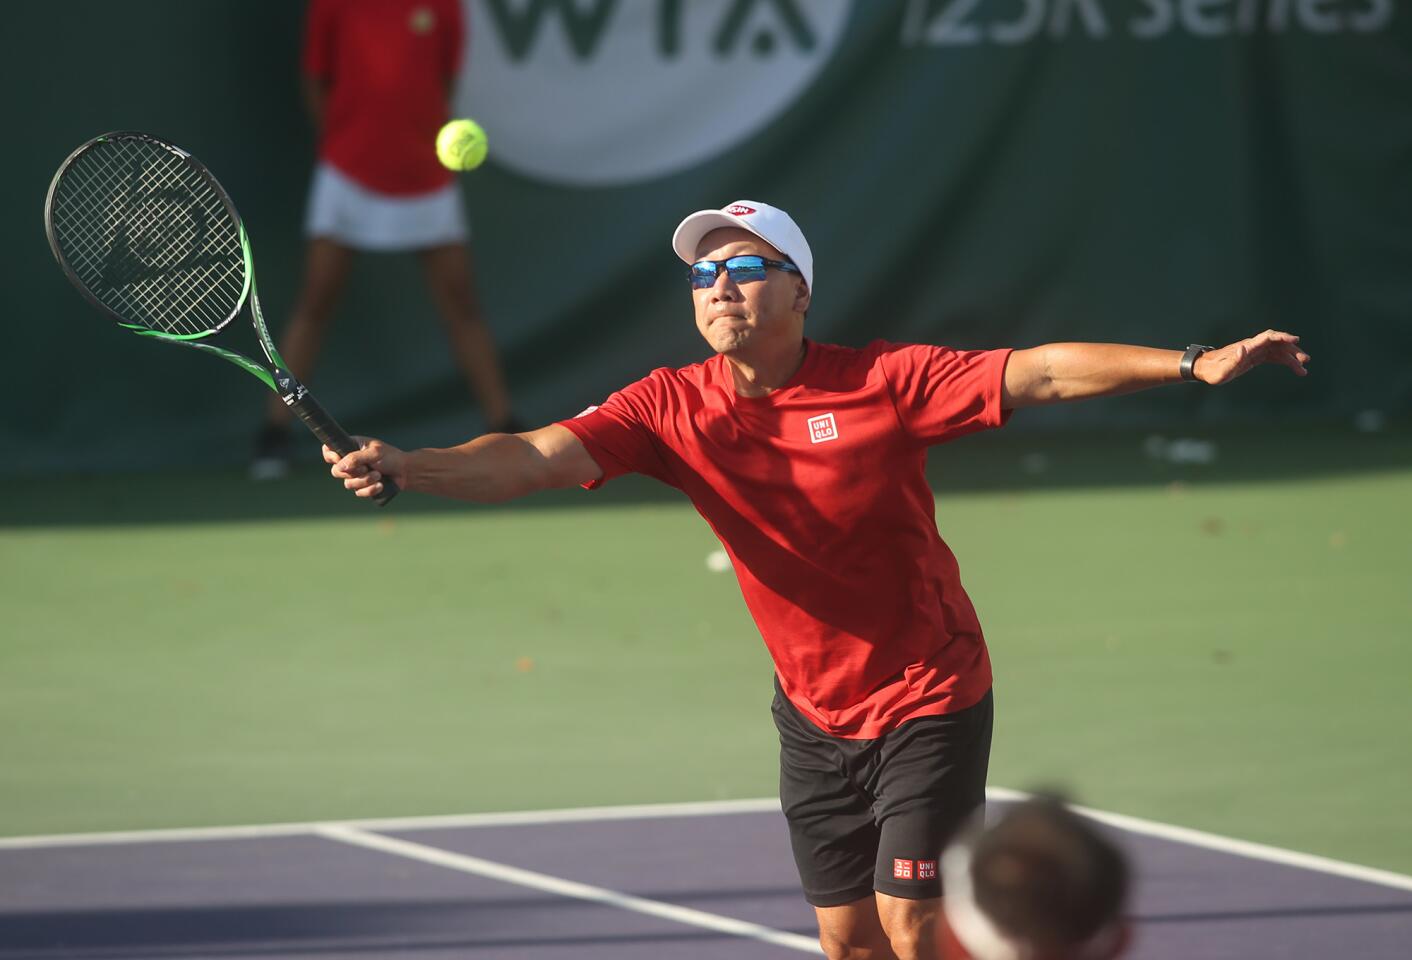 Michael Chang Tennis Classic for charity